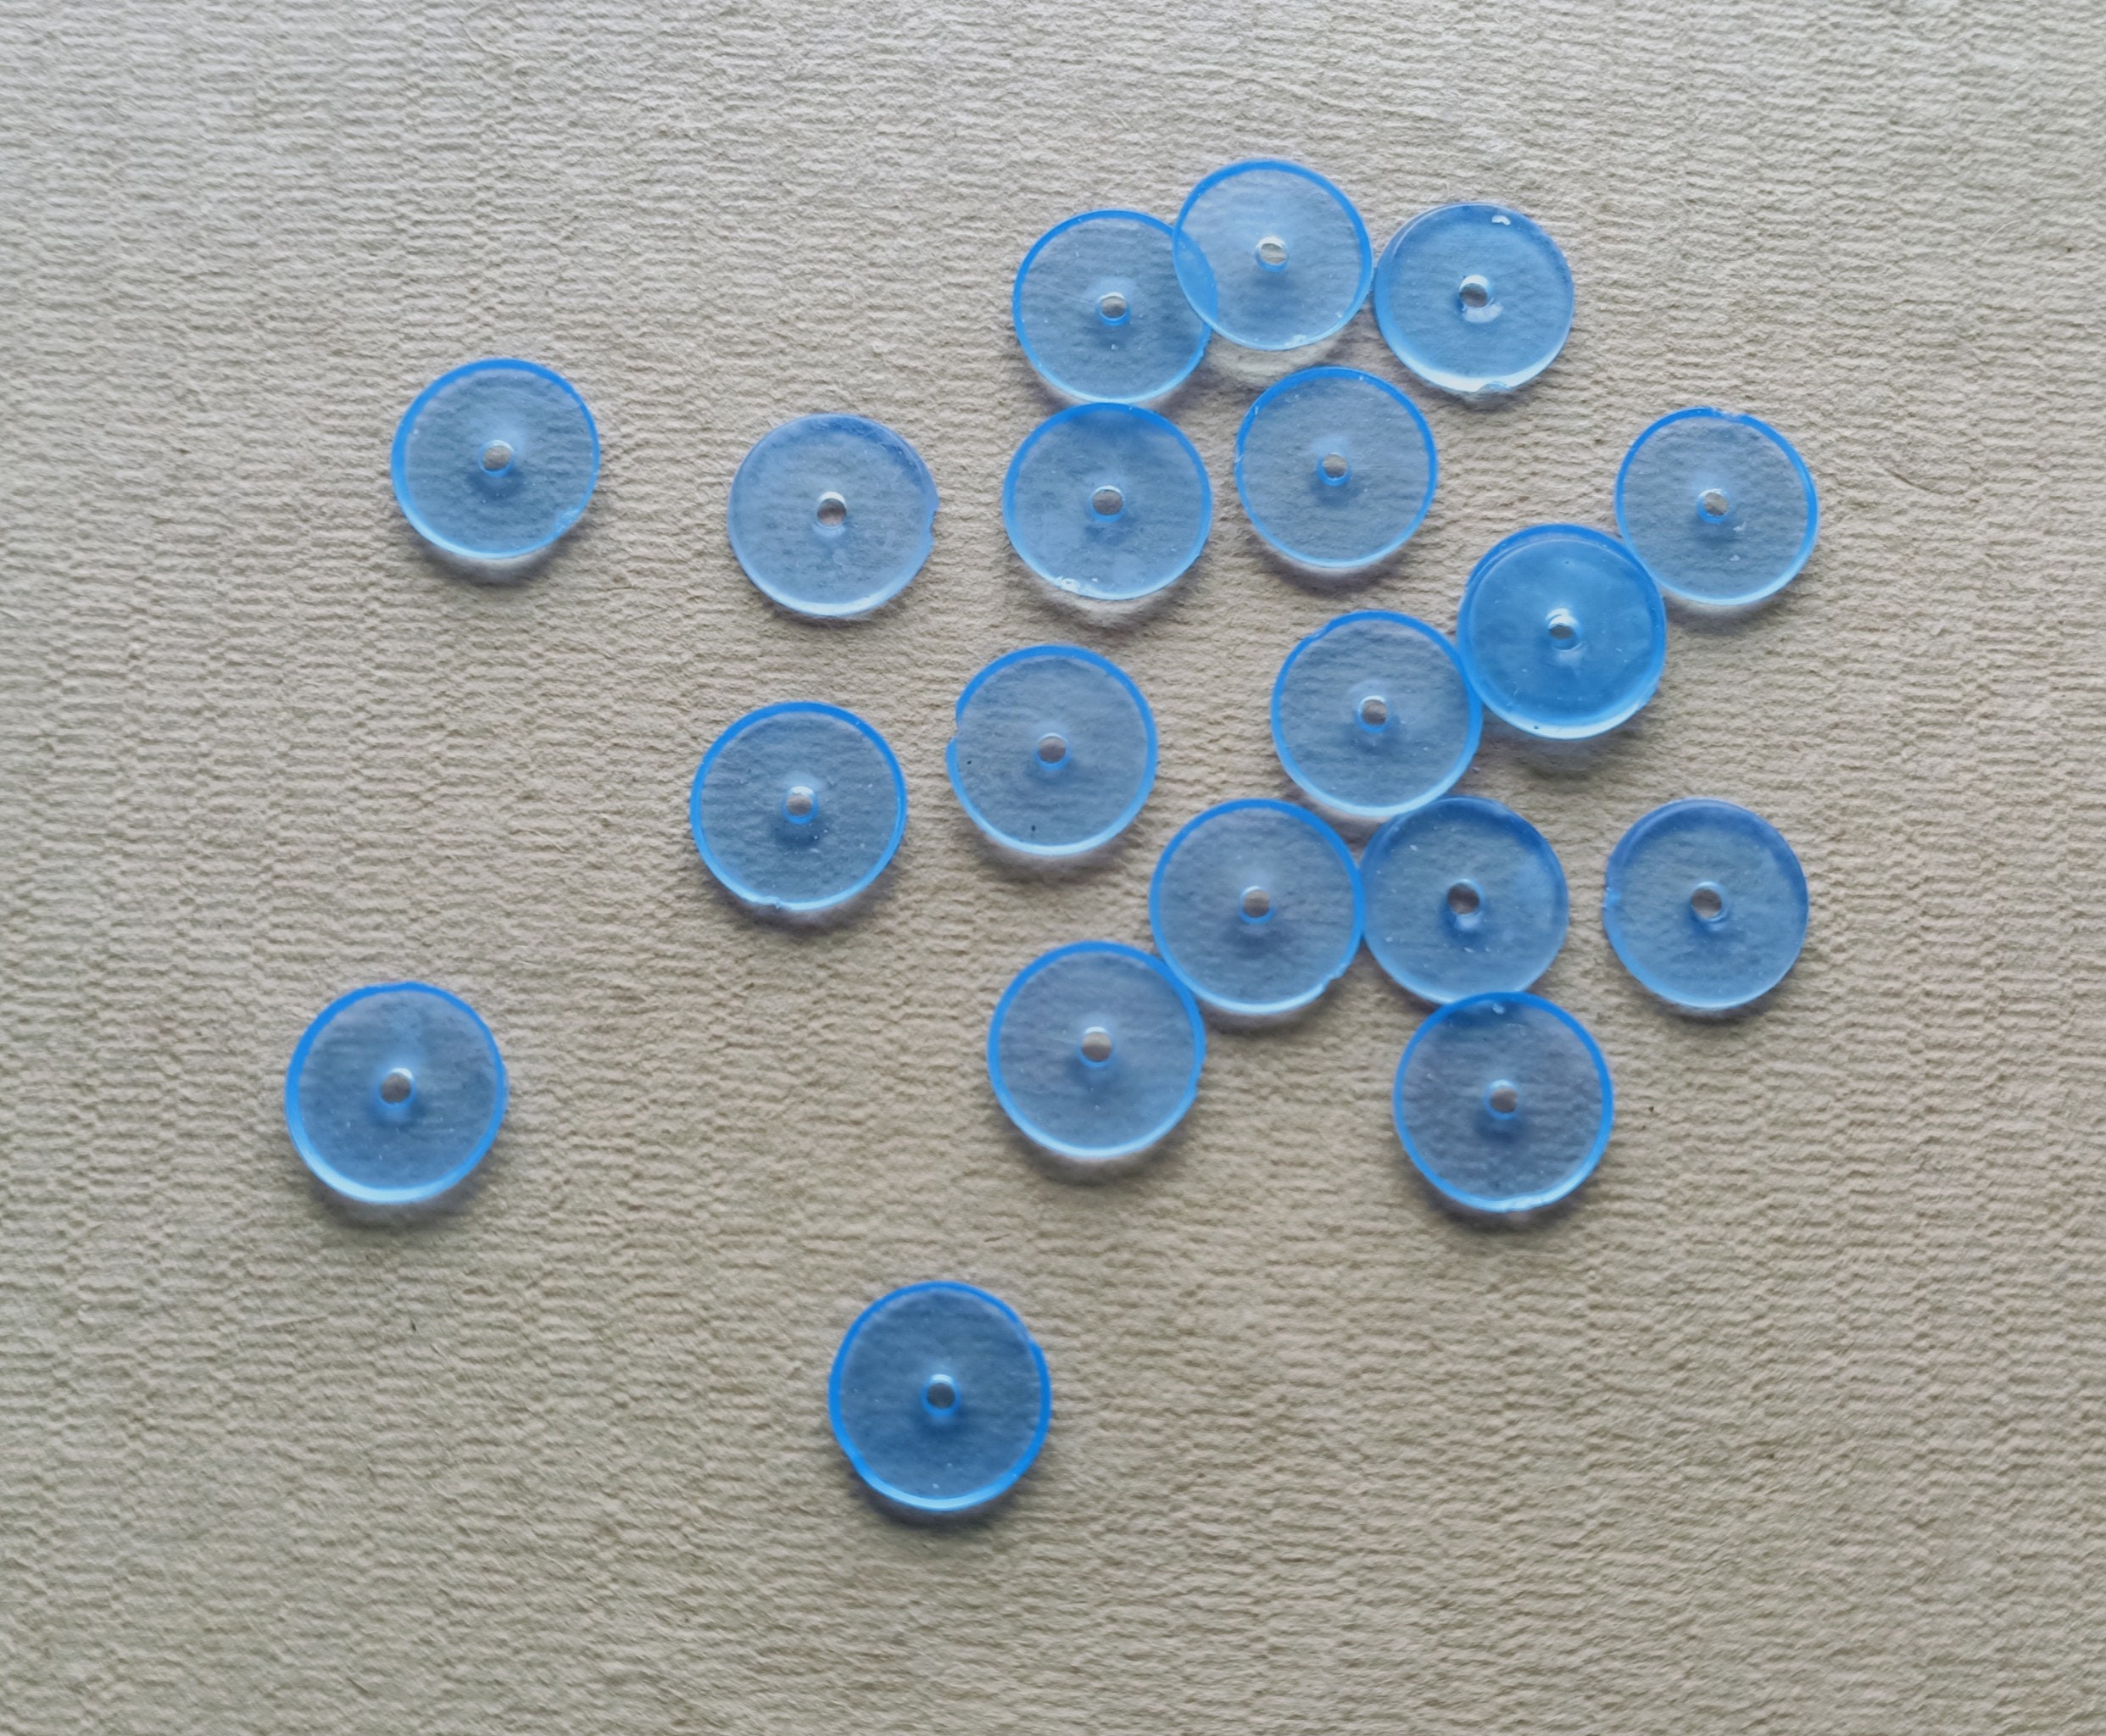 20x Secure Earring Backs for Heavy Earrings Stoppers Plastic Discs Silver  Plated